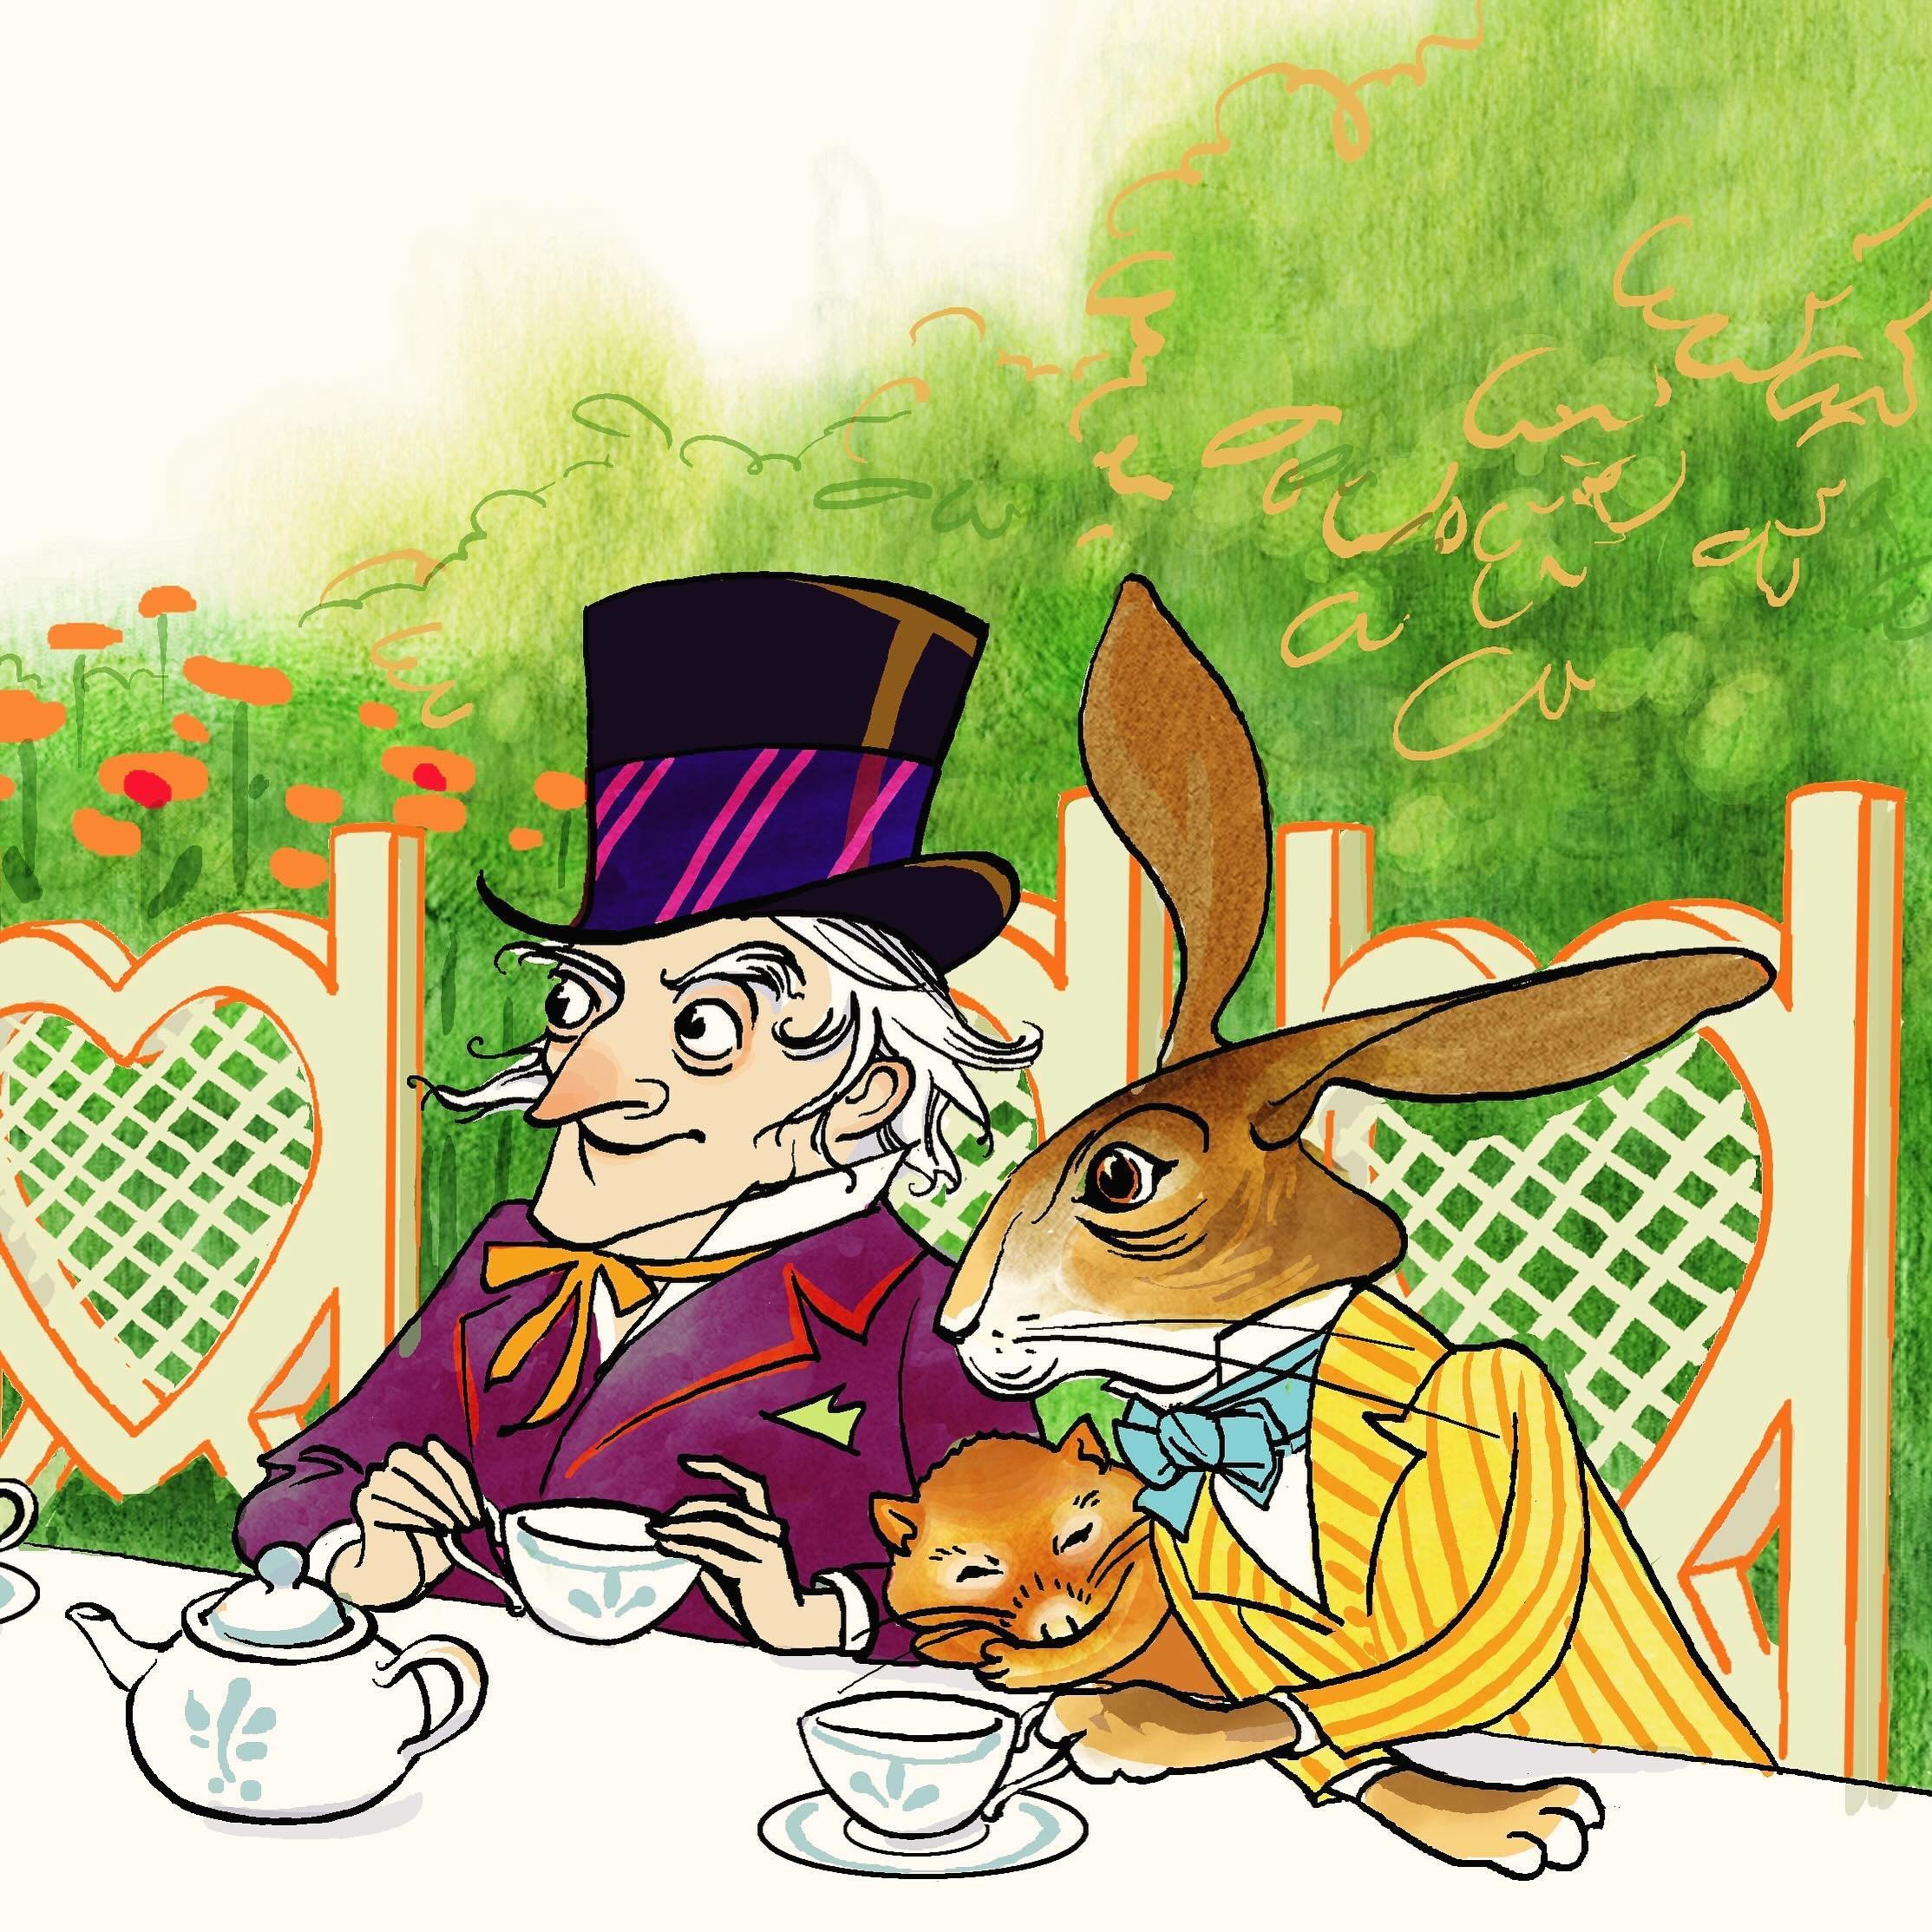 Okay folks, have you SEEN the lovely weather headed our way? Time for a garden party!

#madhatterteaparty #illustration #illustrationartists #illustrationart #waitertheresadoormouseinmytea